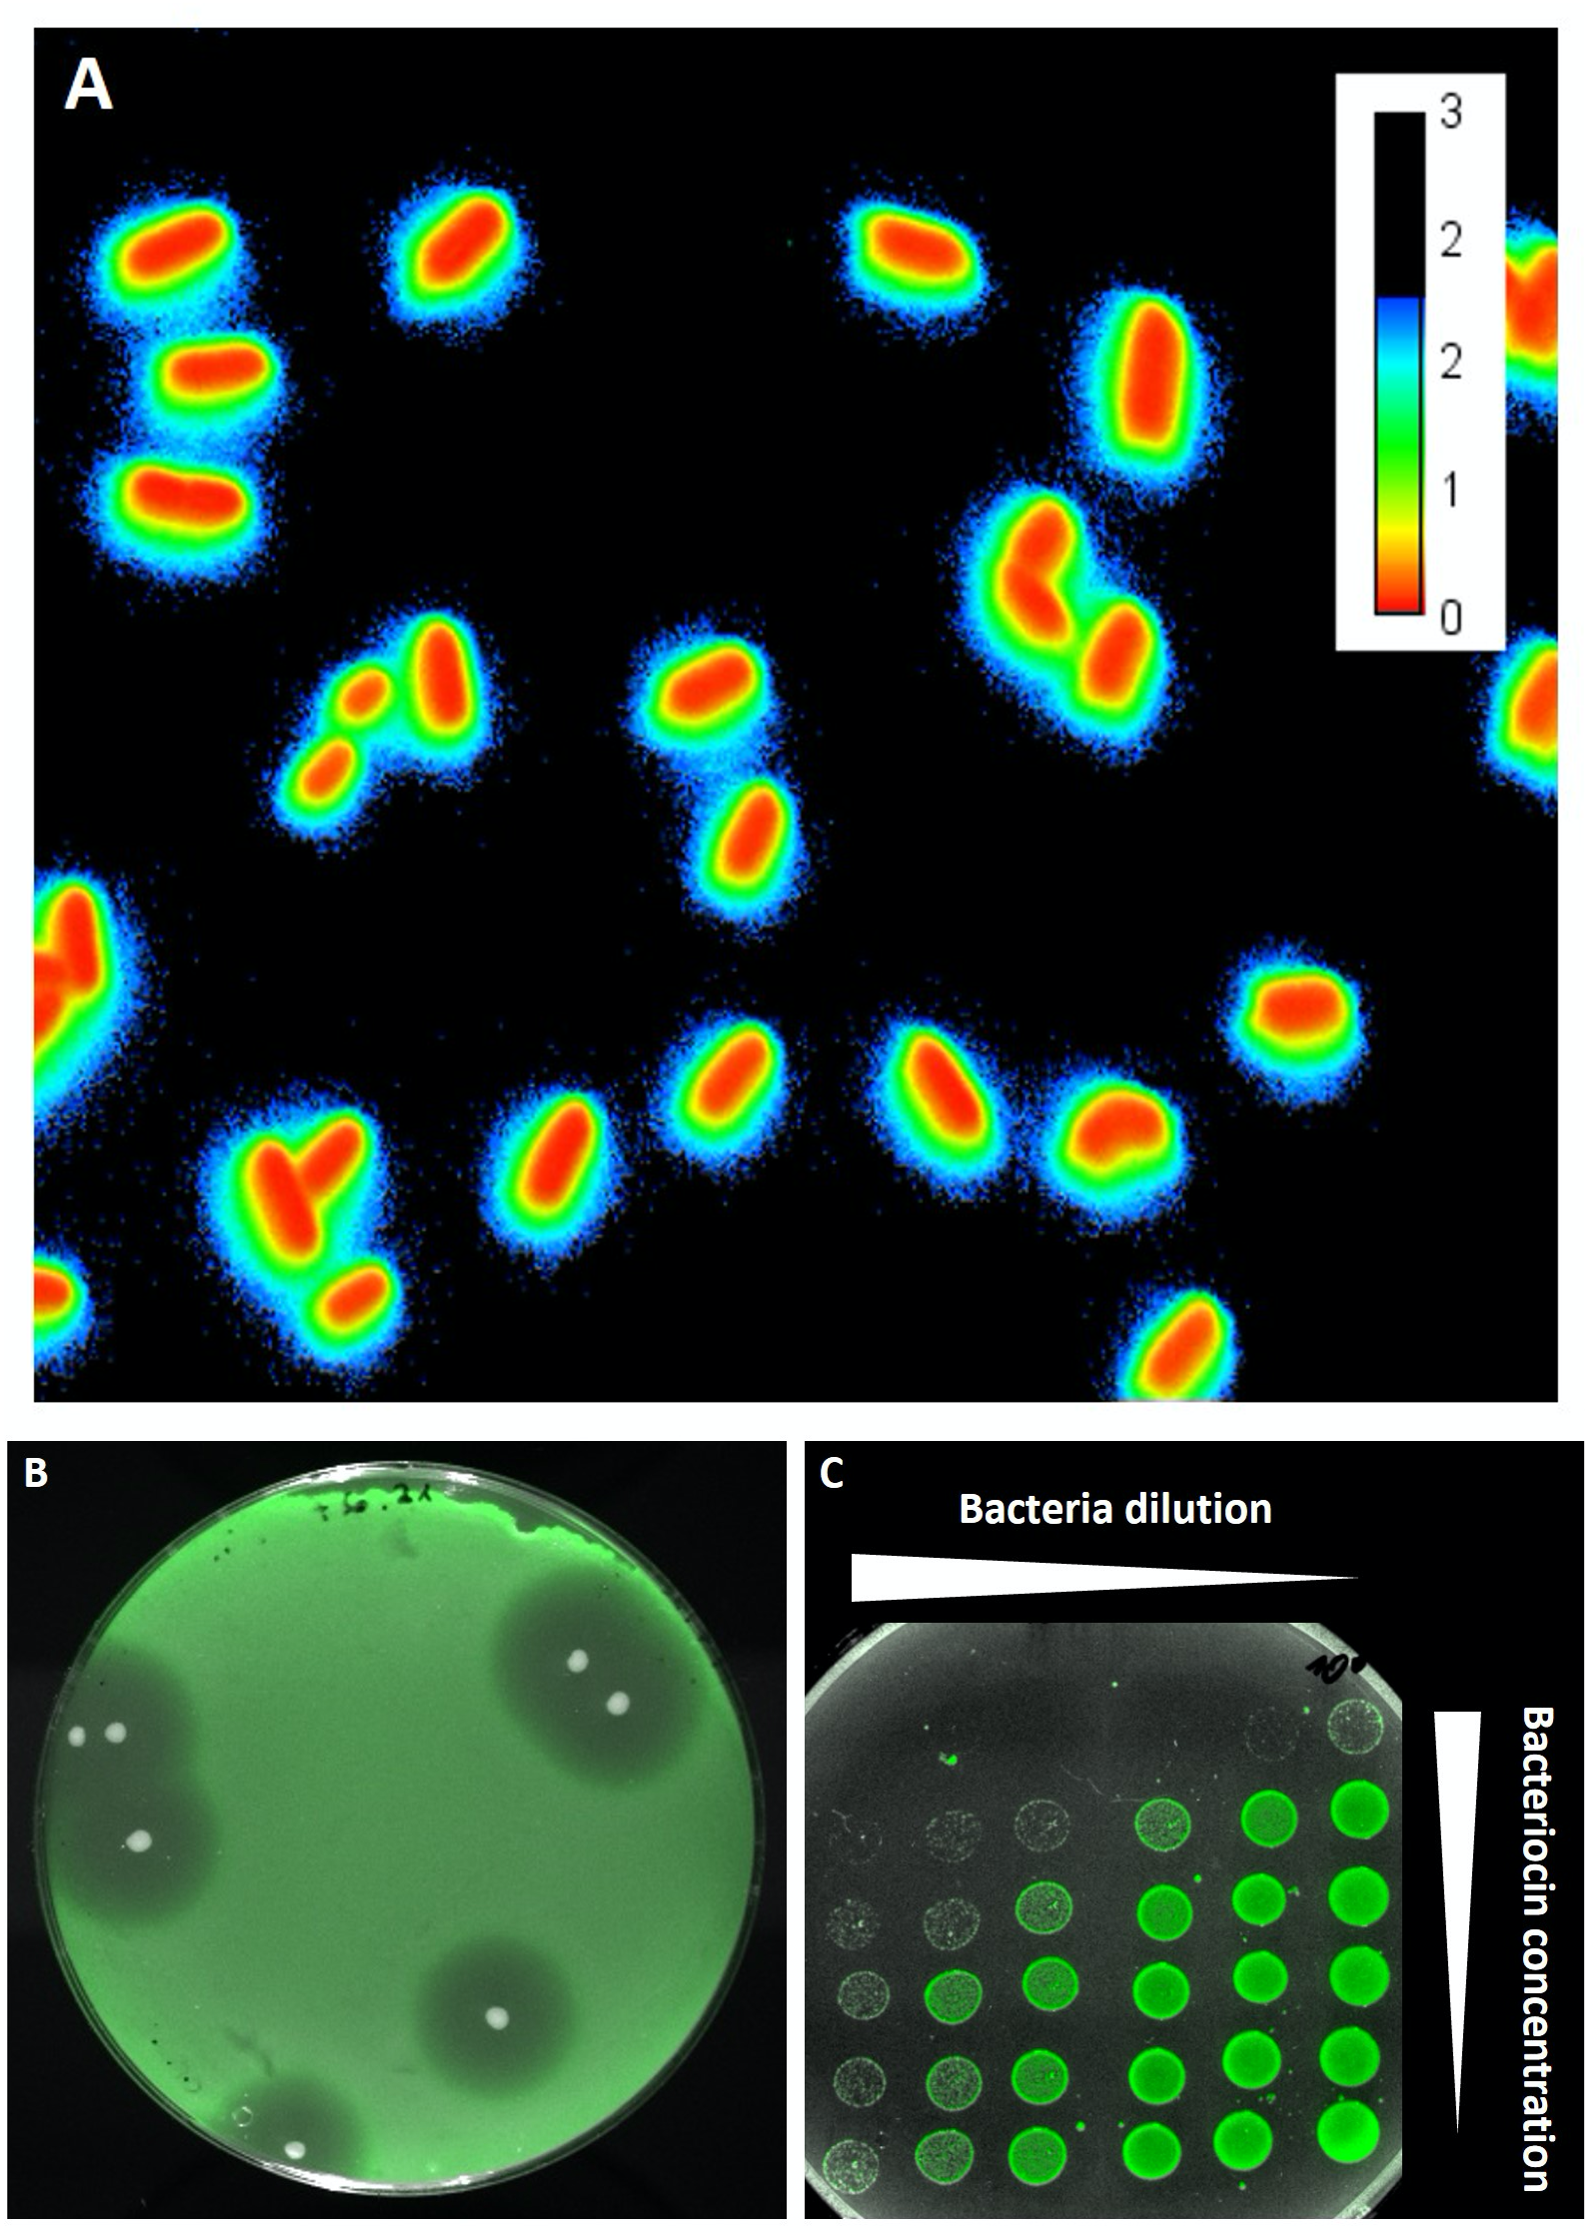 Three colorful fluorescence microscopy images of the bacteria appearing as round and oval dots.